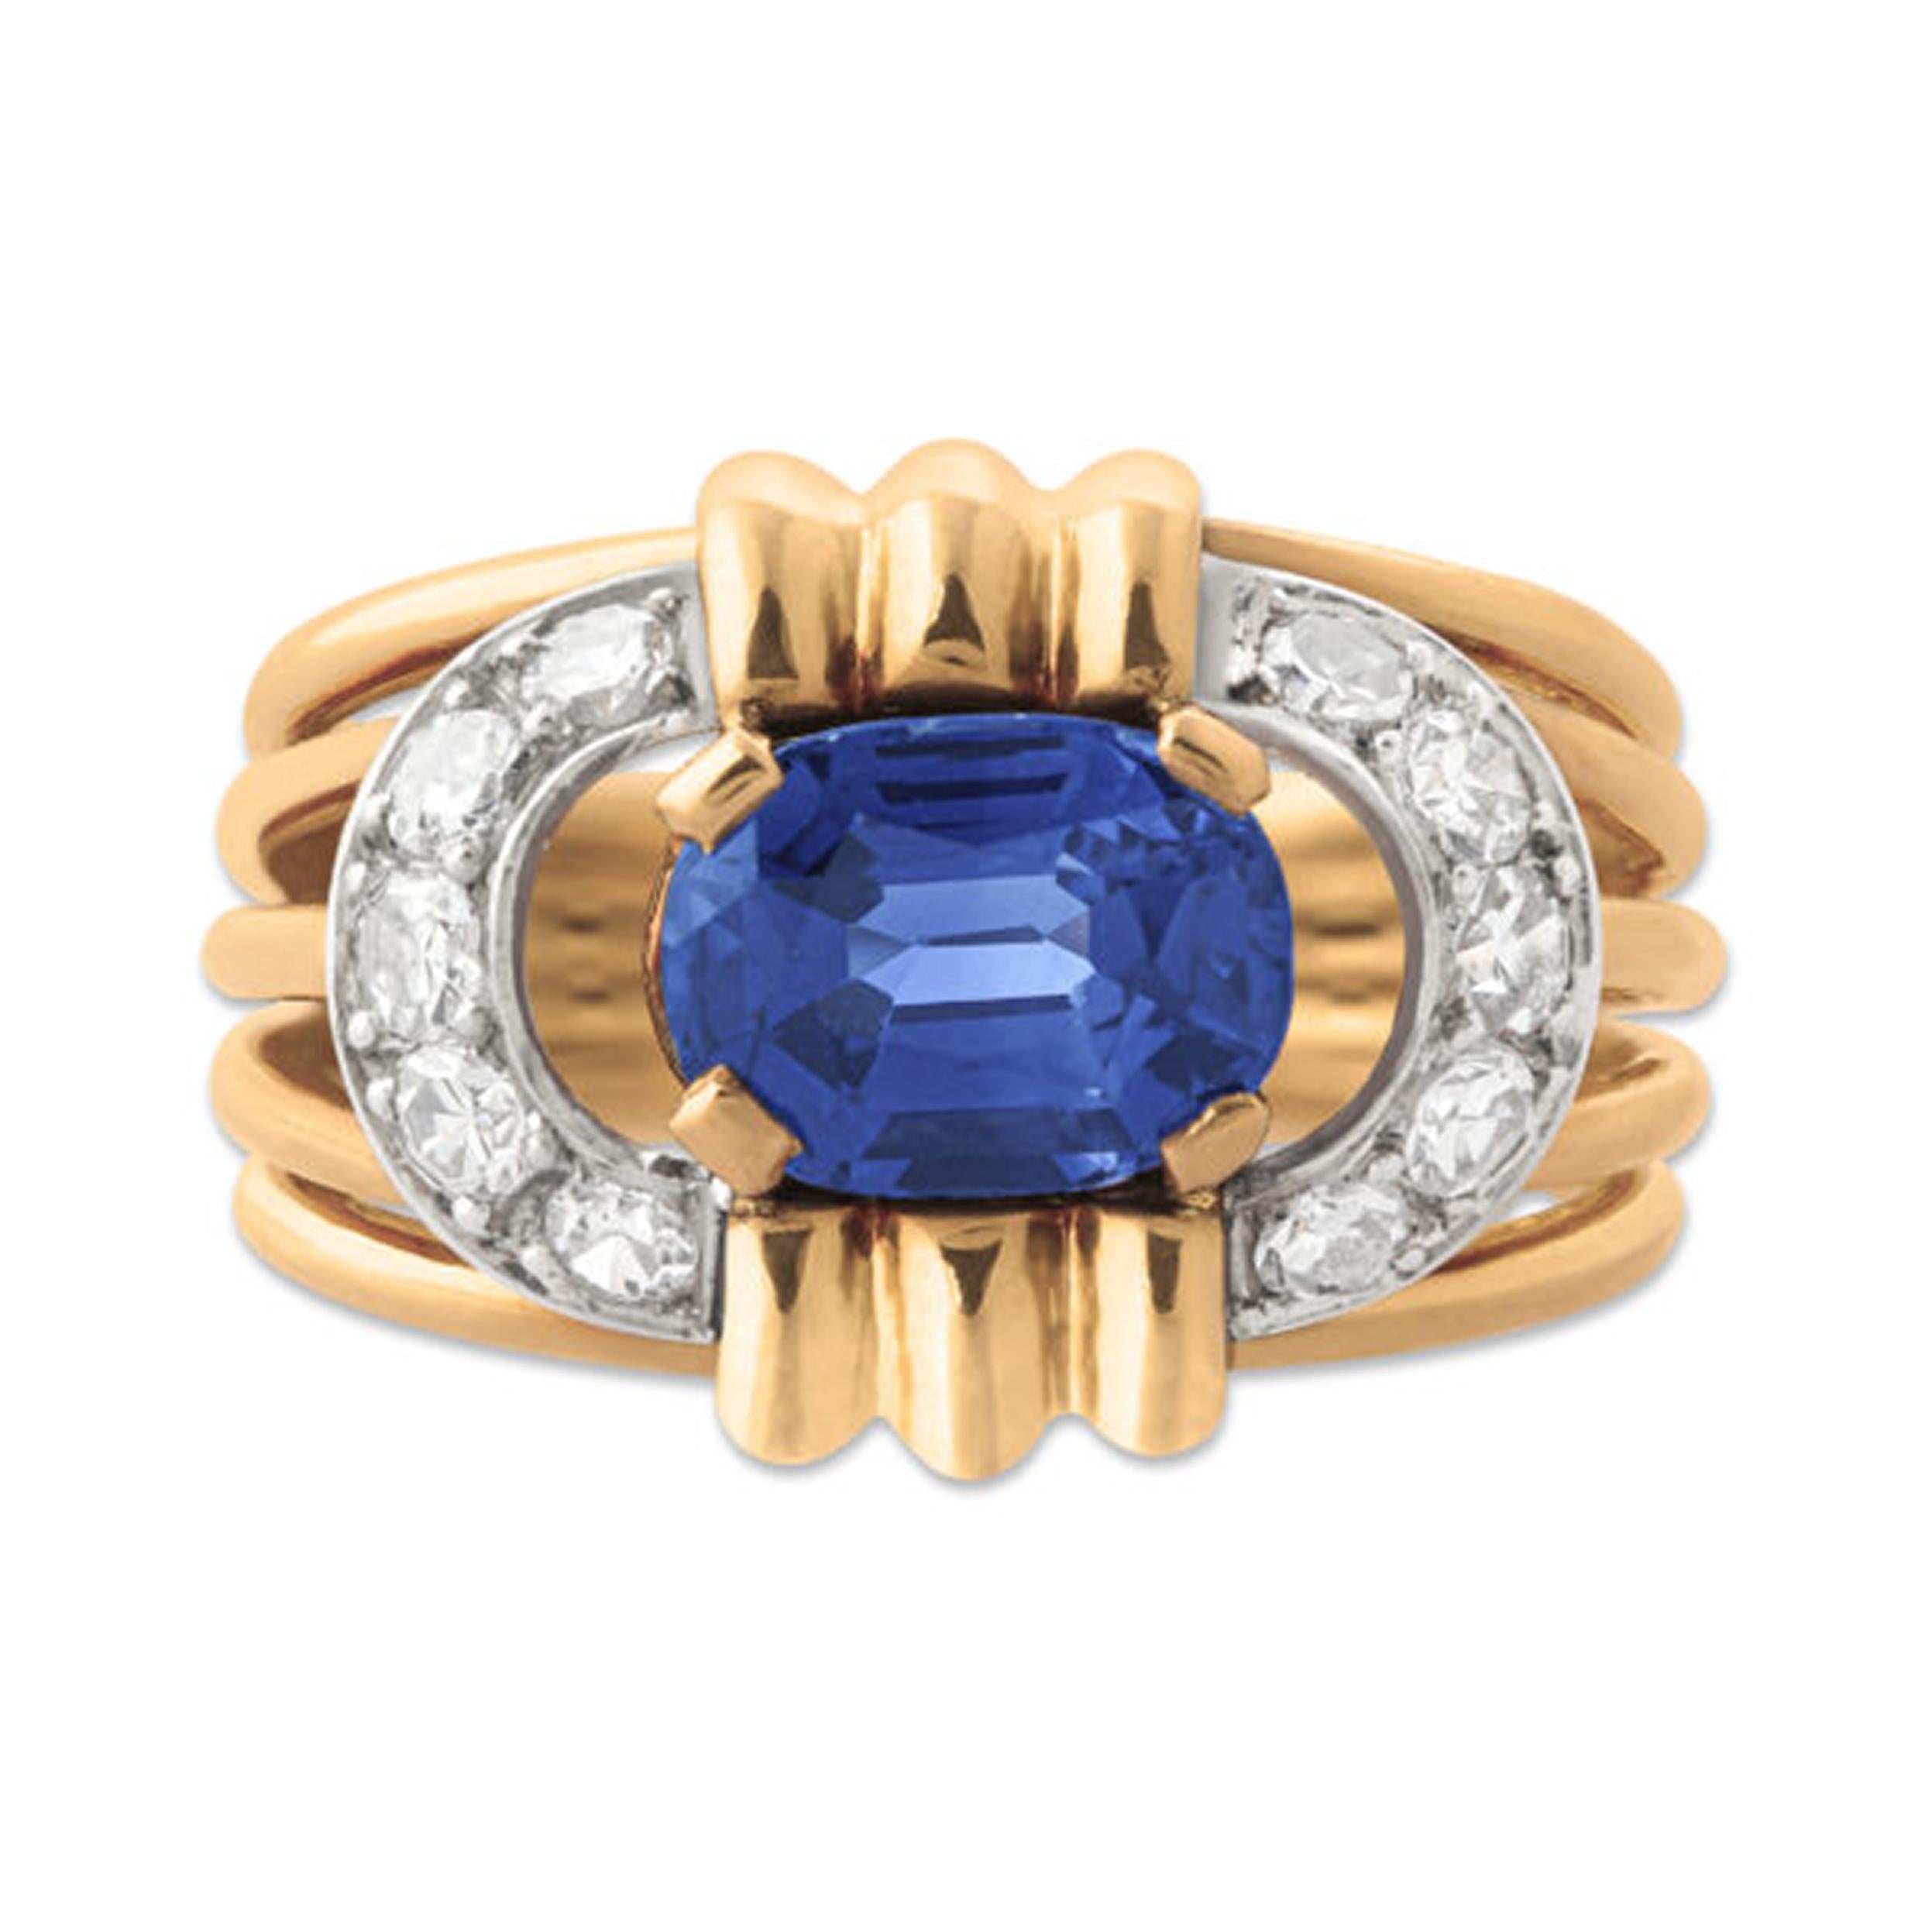 A gold, sapphire & diamond ring, set at the centre with a 1.77 carat oval-cut sapphire in a decorative openwork gold mount surrounded by 10 circle-cut diamonds. The sapphire is unheated and of Kashmir origin, it is accompanied by a Gubelin